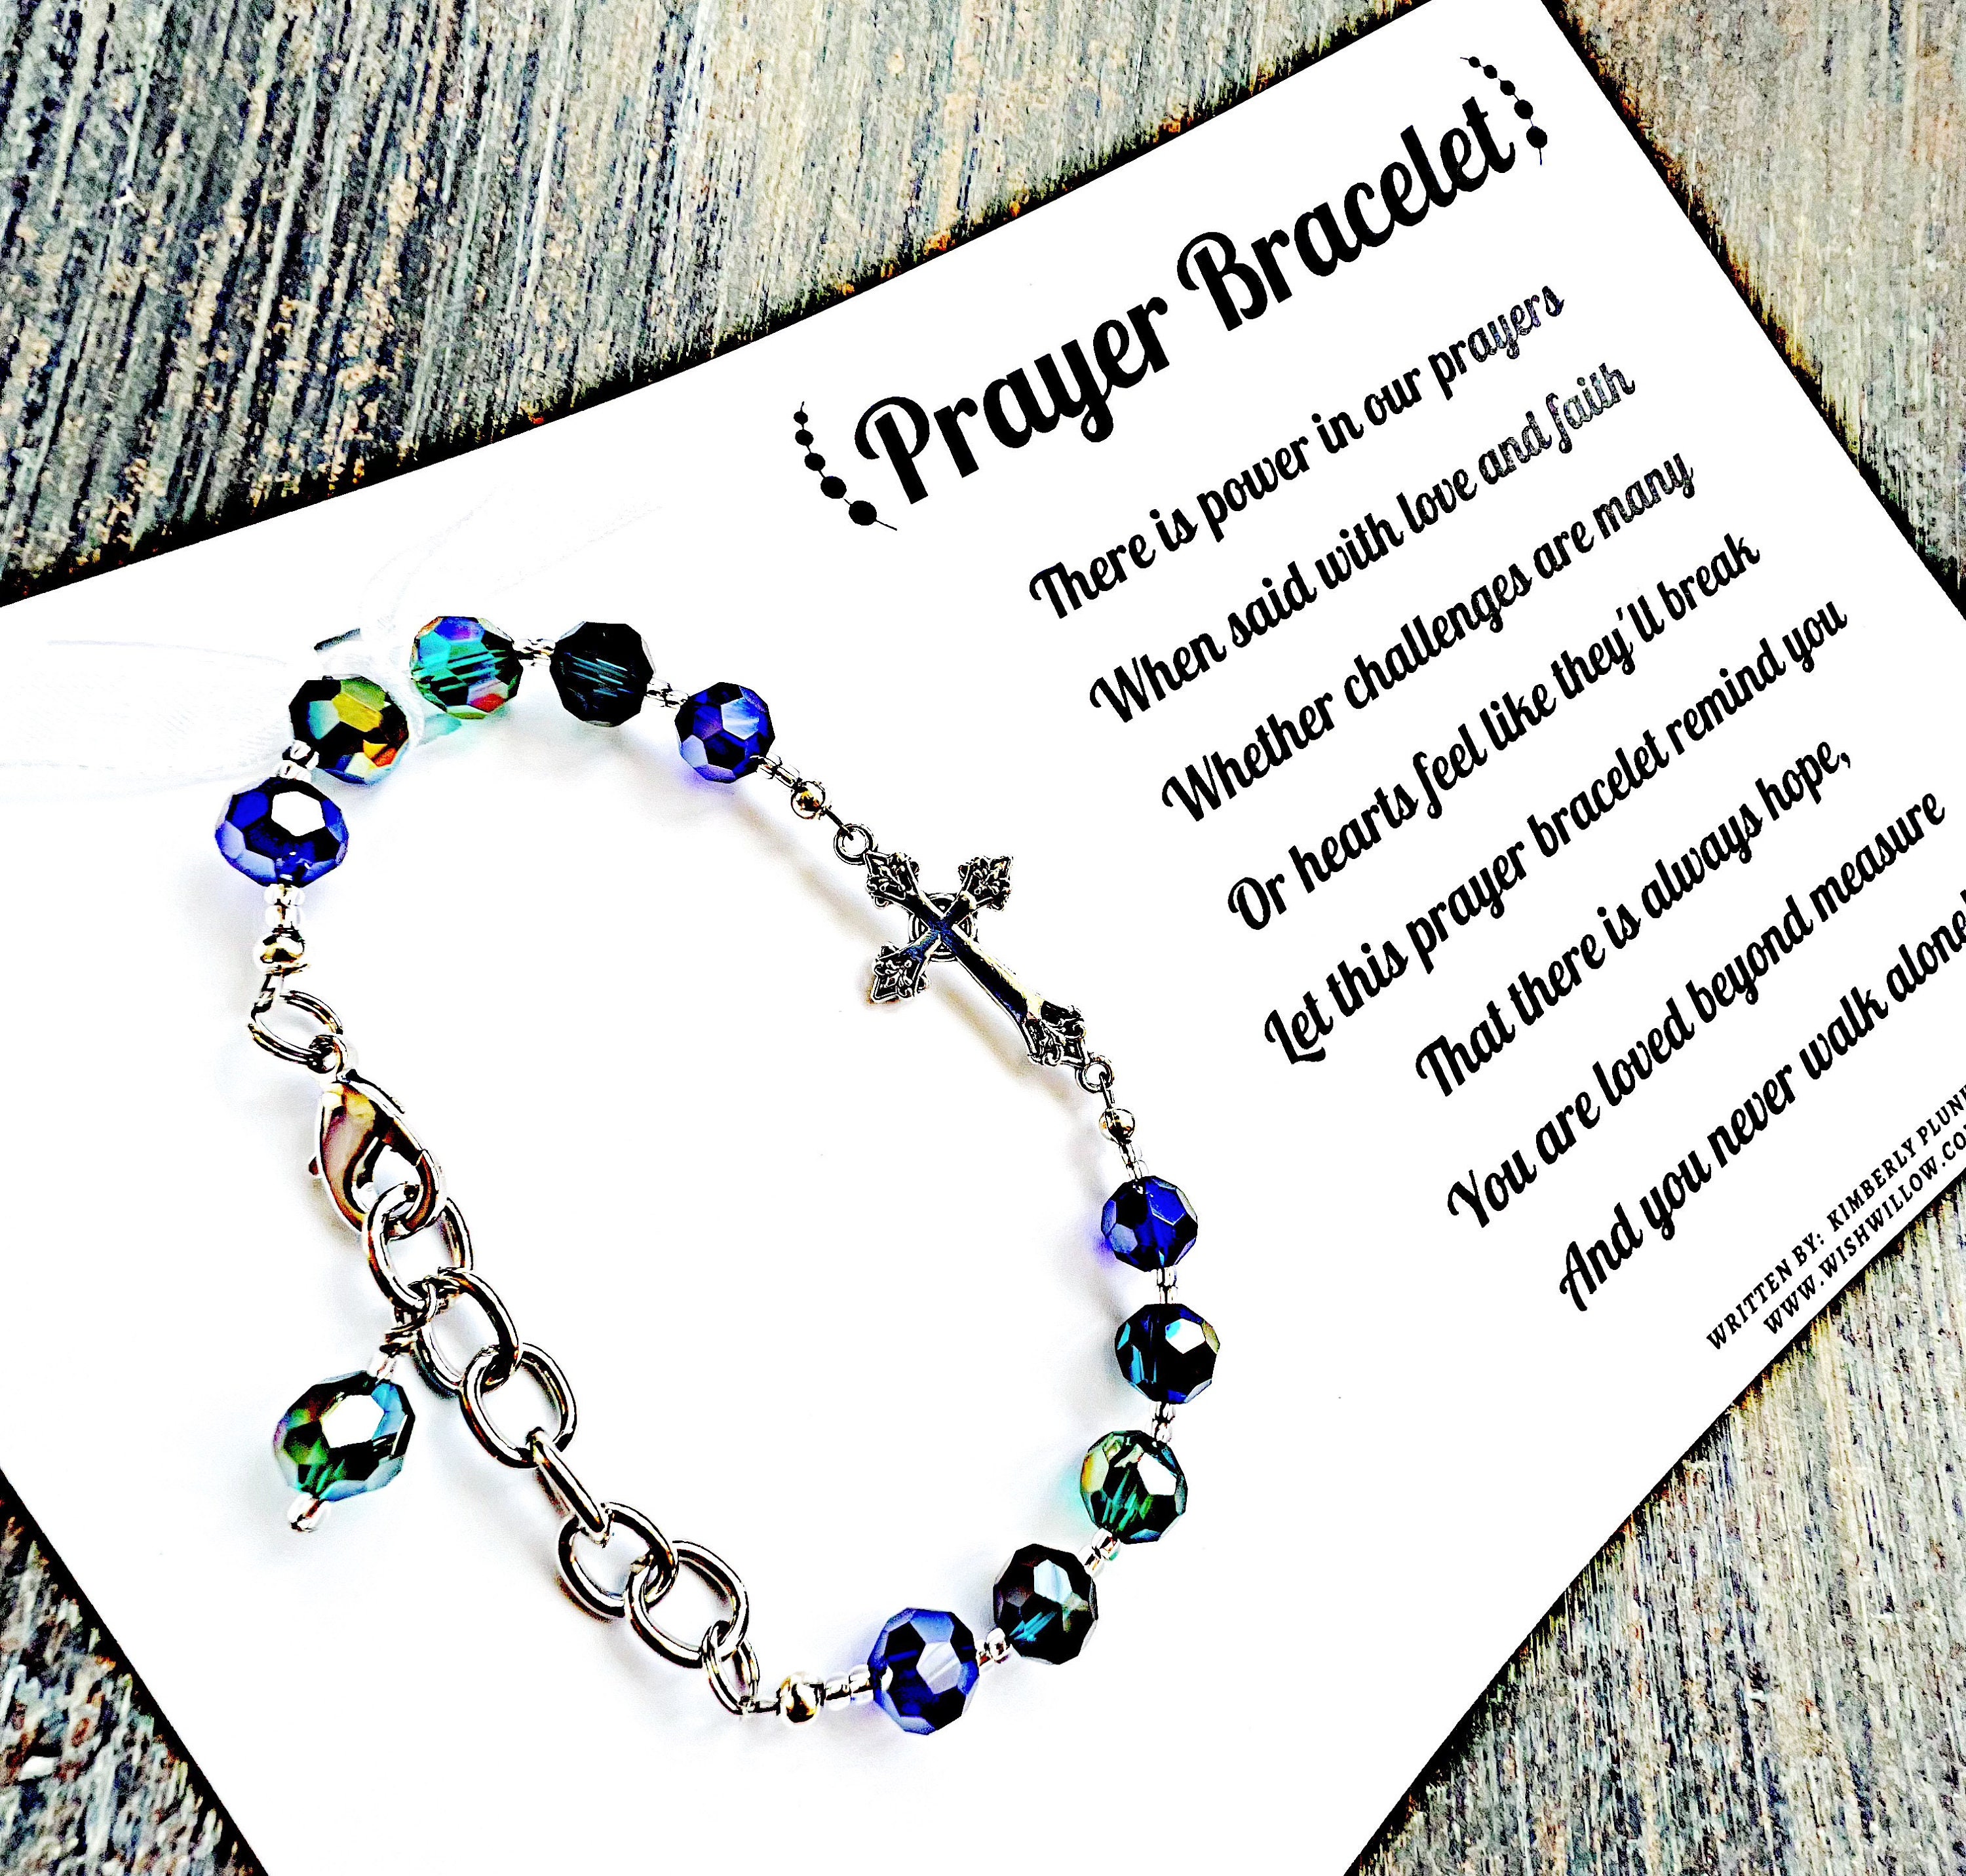 Anglican Prayer Beads Shop Handmade in the USA - Unspoken Elements